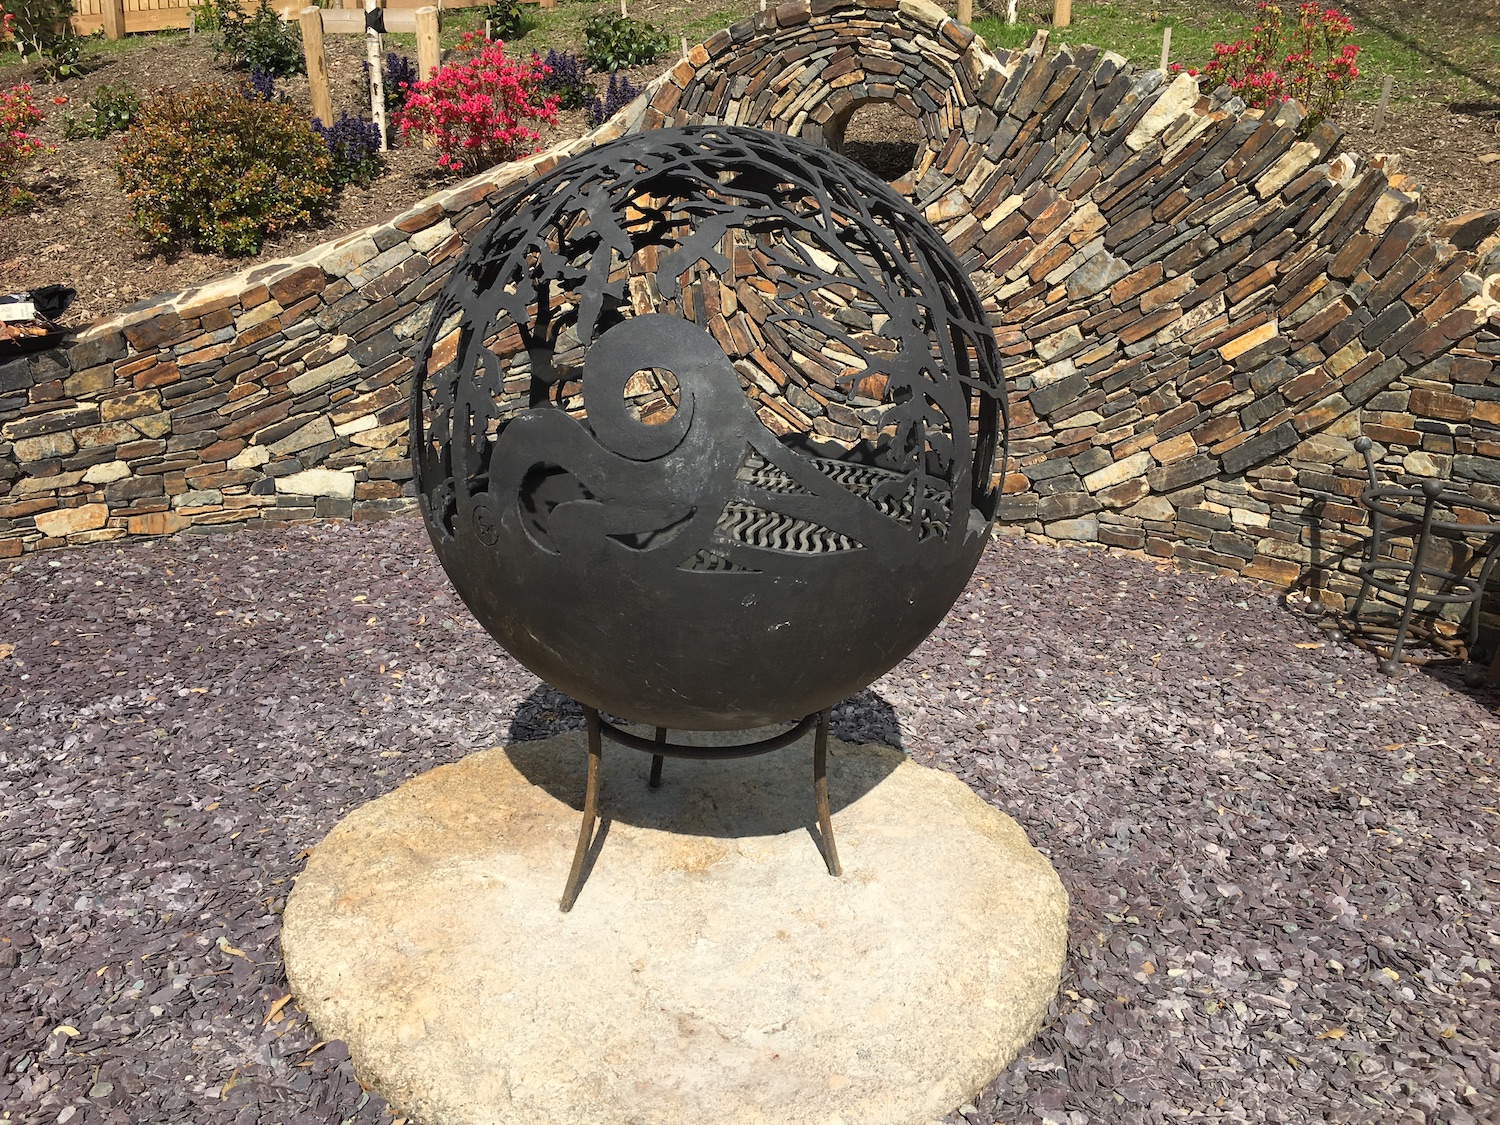 Handmade Fire Pit Celebrated At The, Handmade Fire Pit